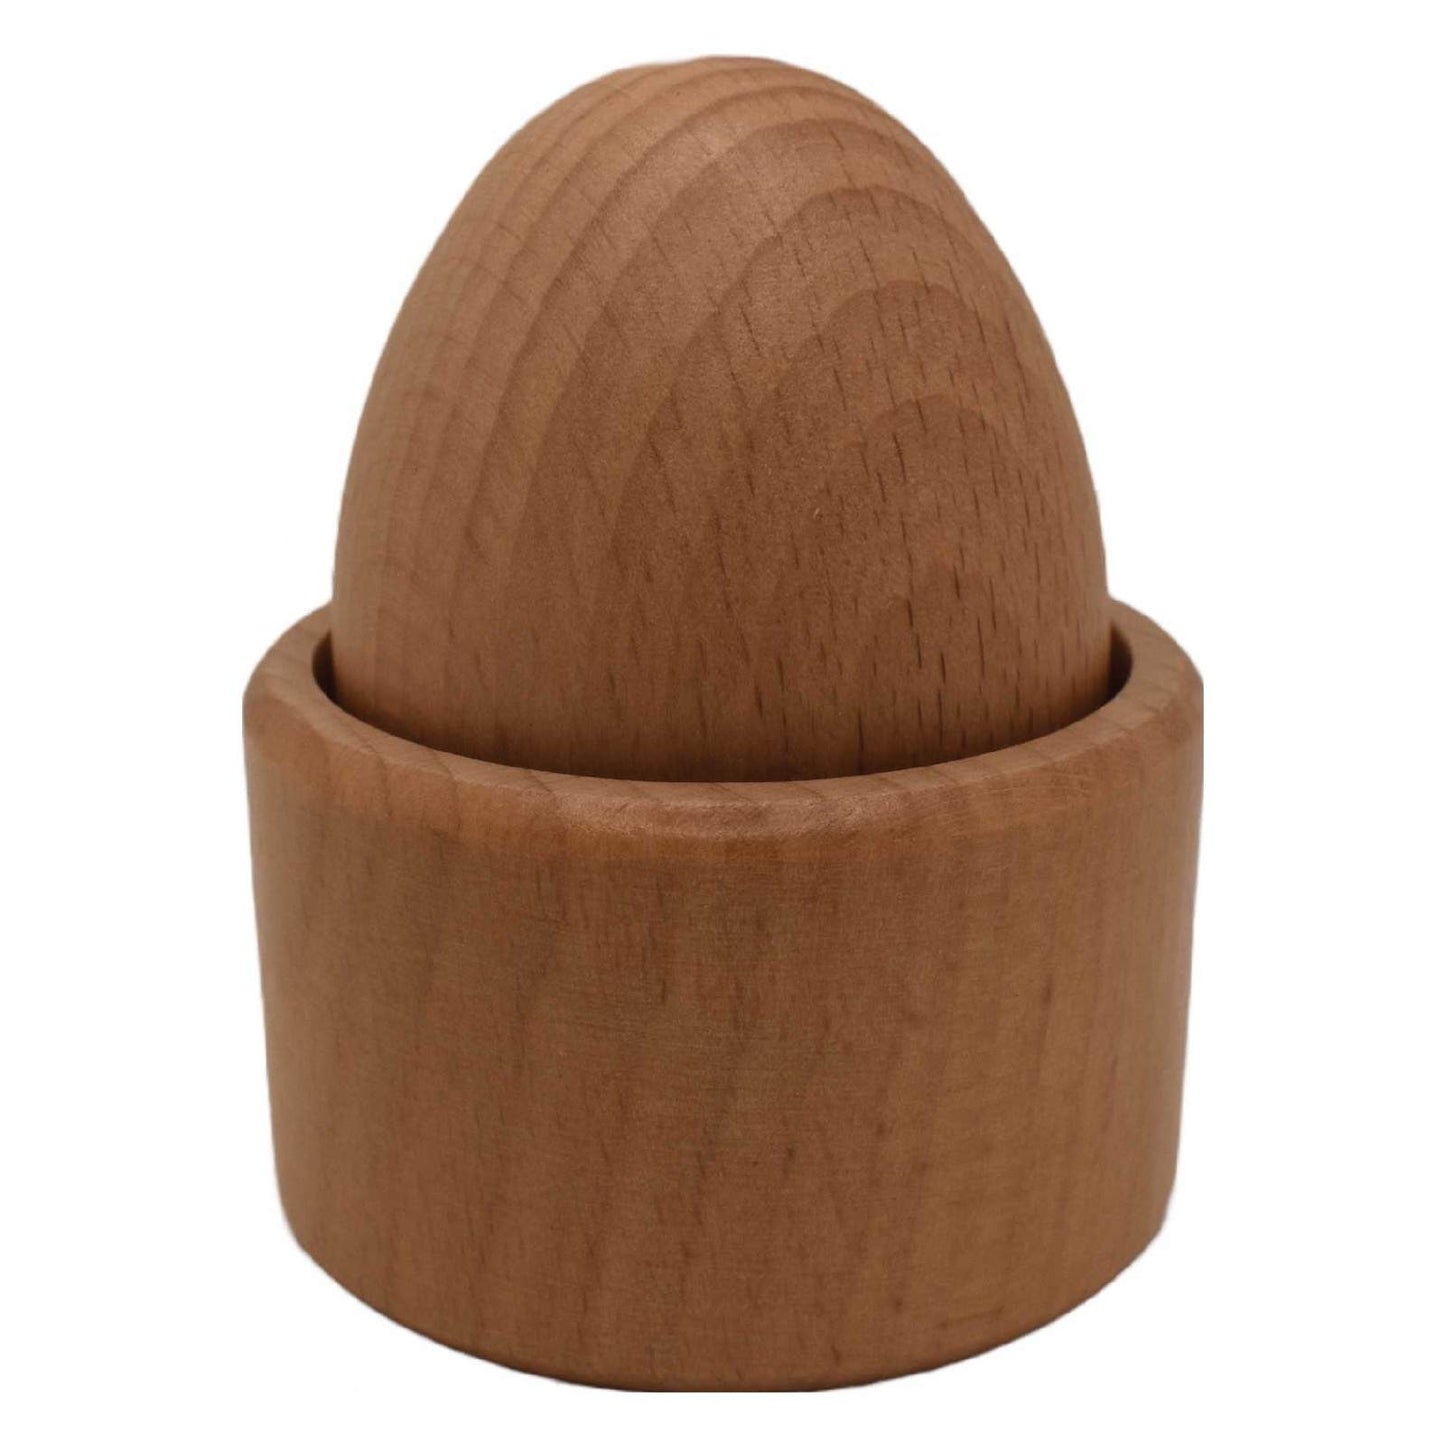 Montessori Wooden Eggs and Cup Set